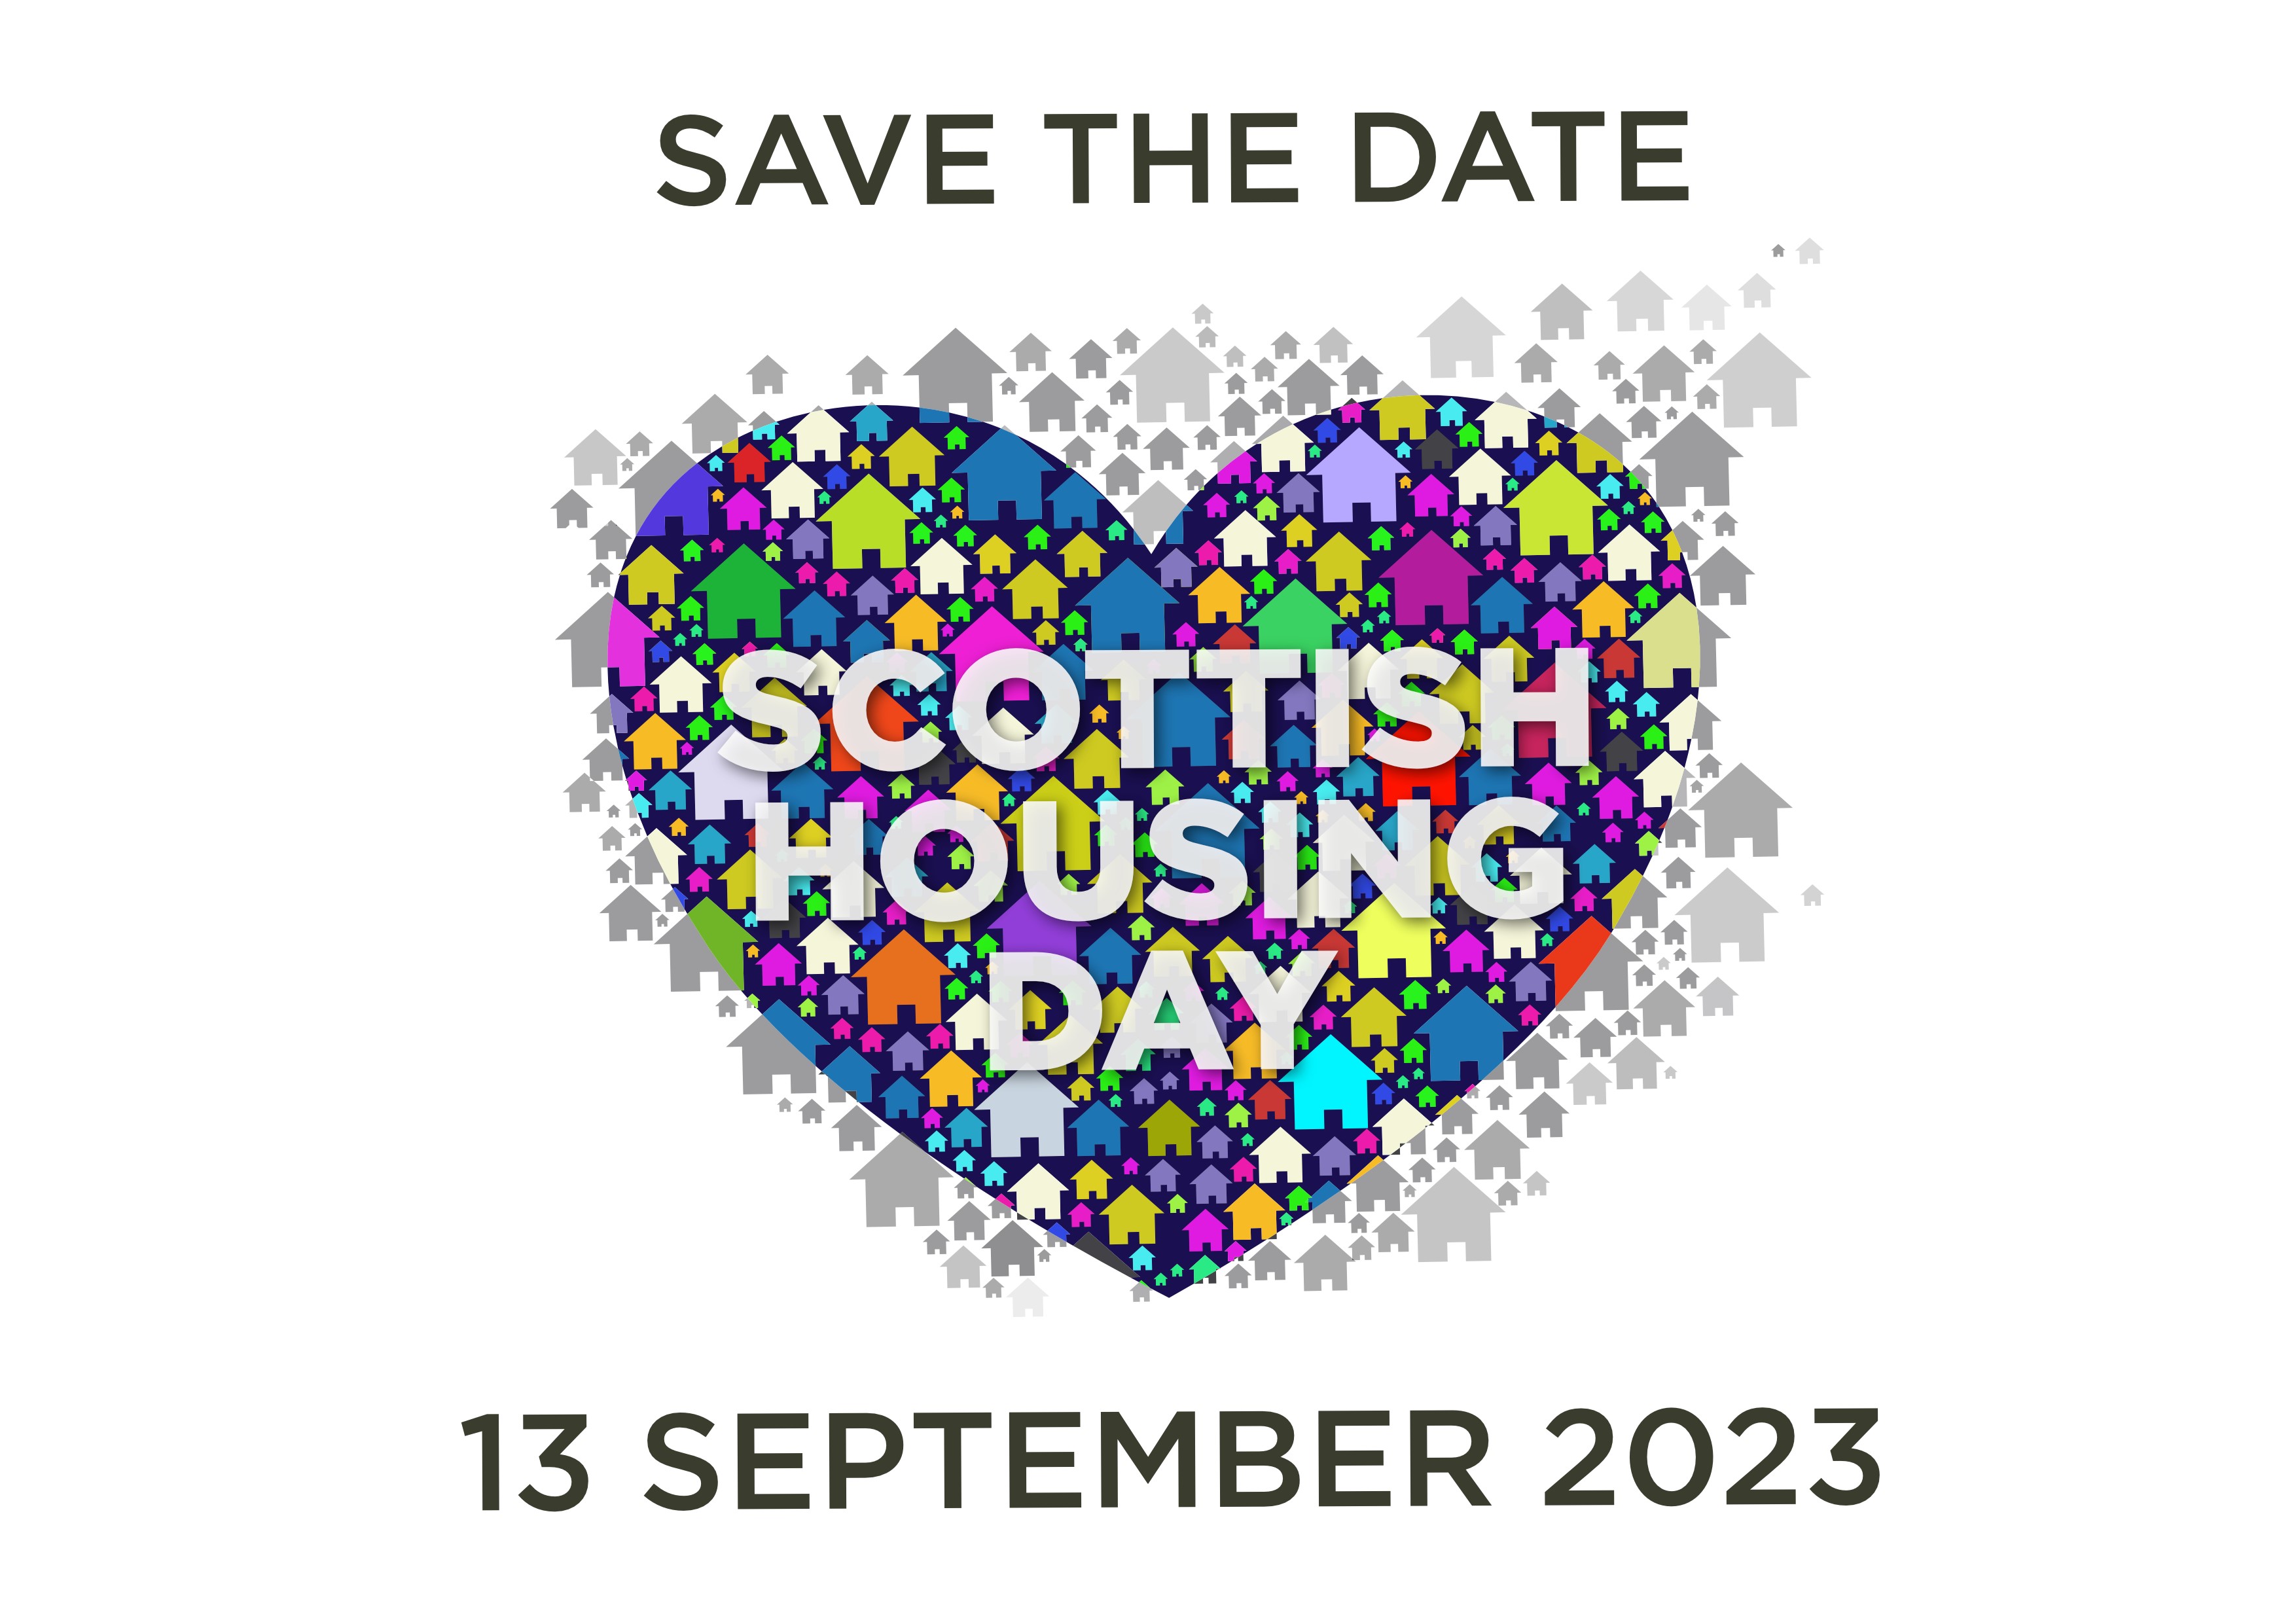 Save the date for Scottish Housing Day 2023